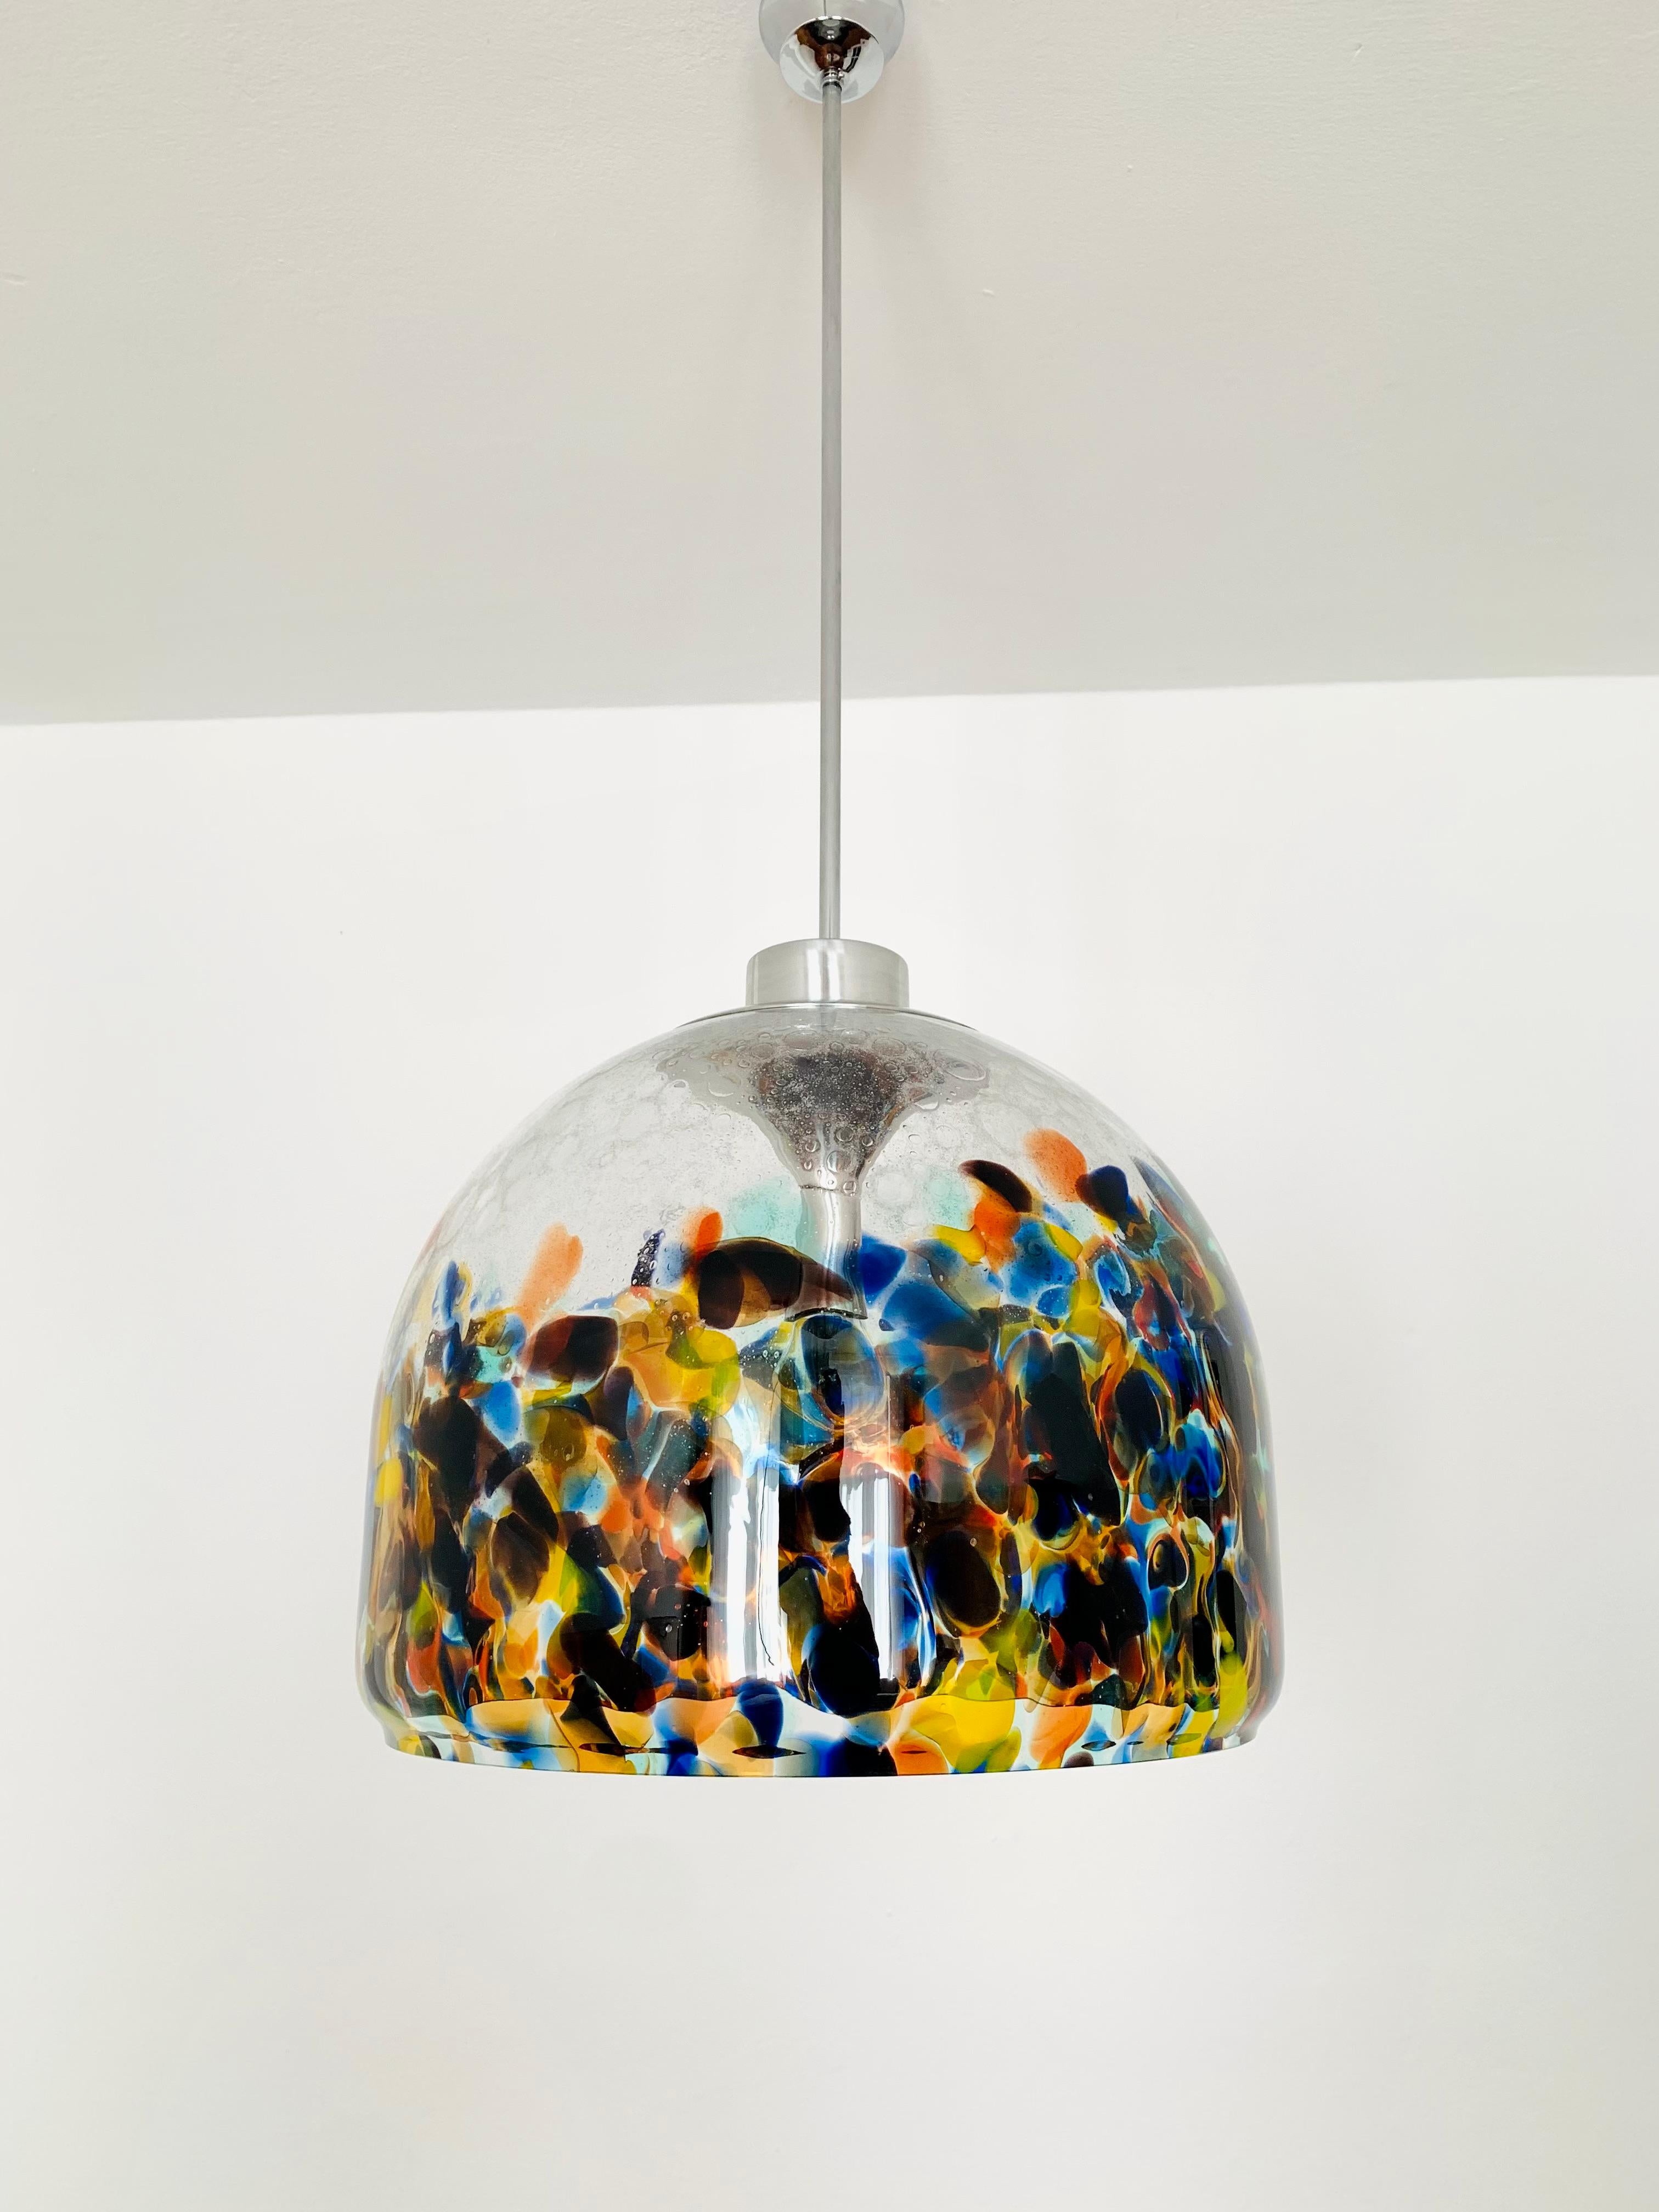 Impressive large colorful Murano glass lamp from the 1960s.
Extraordinarily successful design and very high-quality workmanship.
The colored glass decor creates a very exciting light effect.

Condition:

Very good vintage condition with slight signs